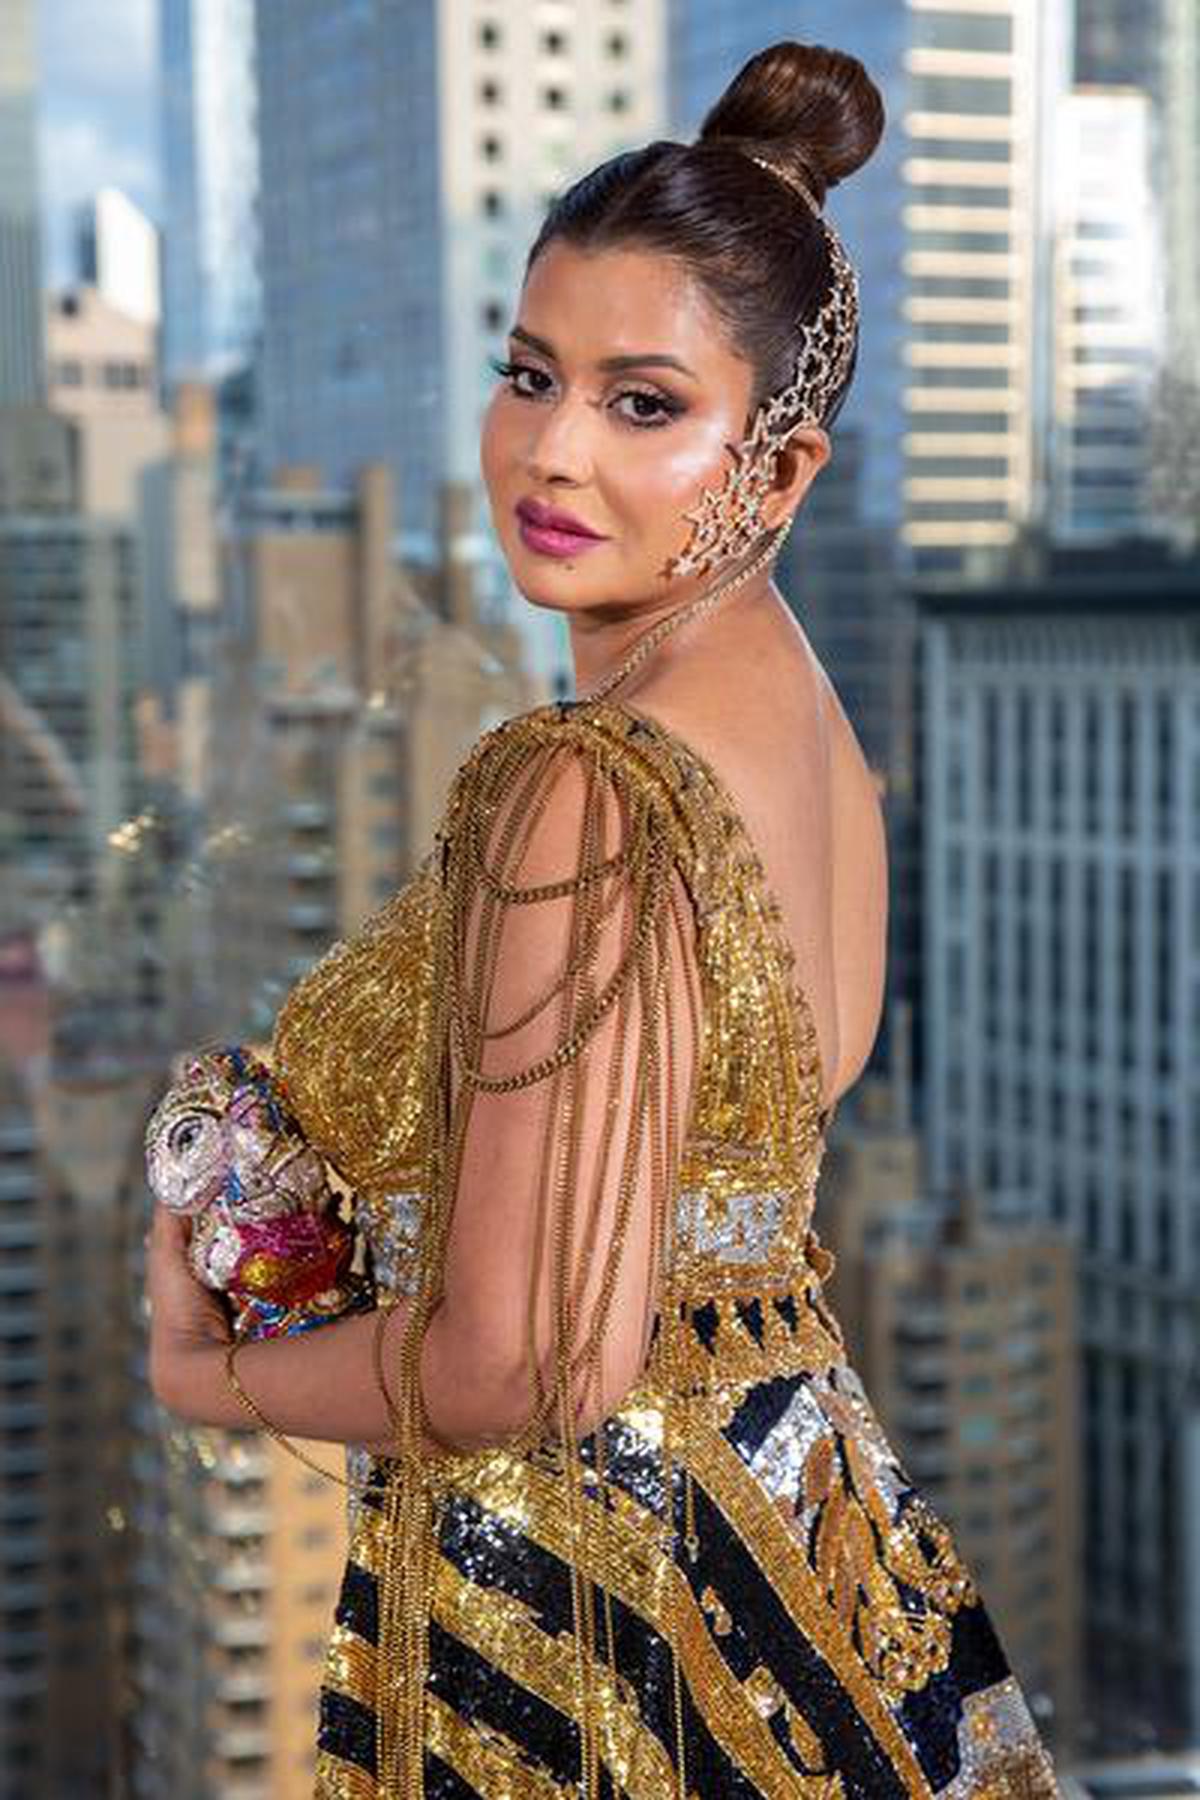 Sudha Reddy in her 2021 Met Gala custom gown by Falguni and Shane Peacock, a diamond-encrusted earcuff by Farah Ali Khan, Chanel sequined gold stilettos and the Ganesha clutch by Judith Leiber